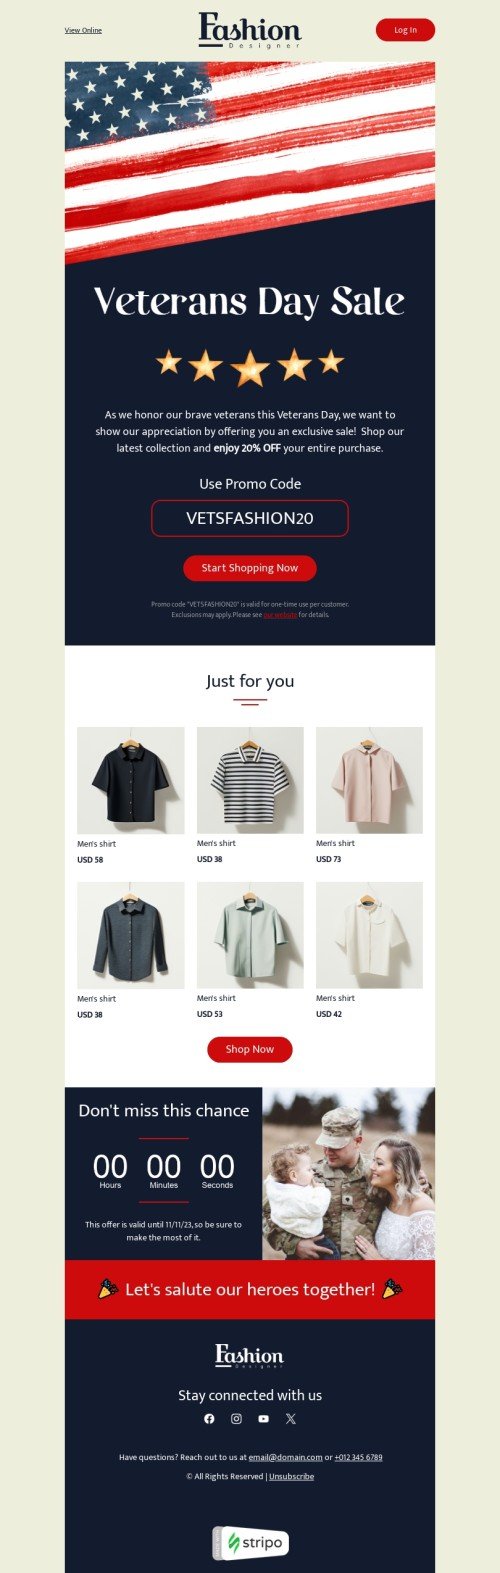 Veterans Day email template "Veterans Day sale" for fashion industry mobile view